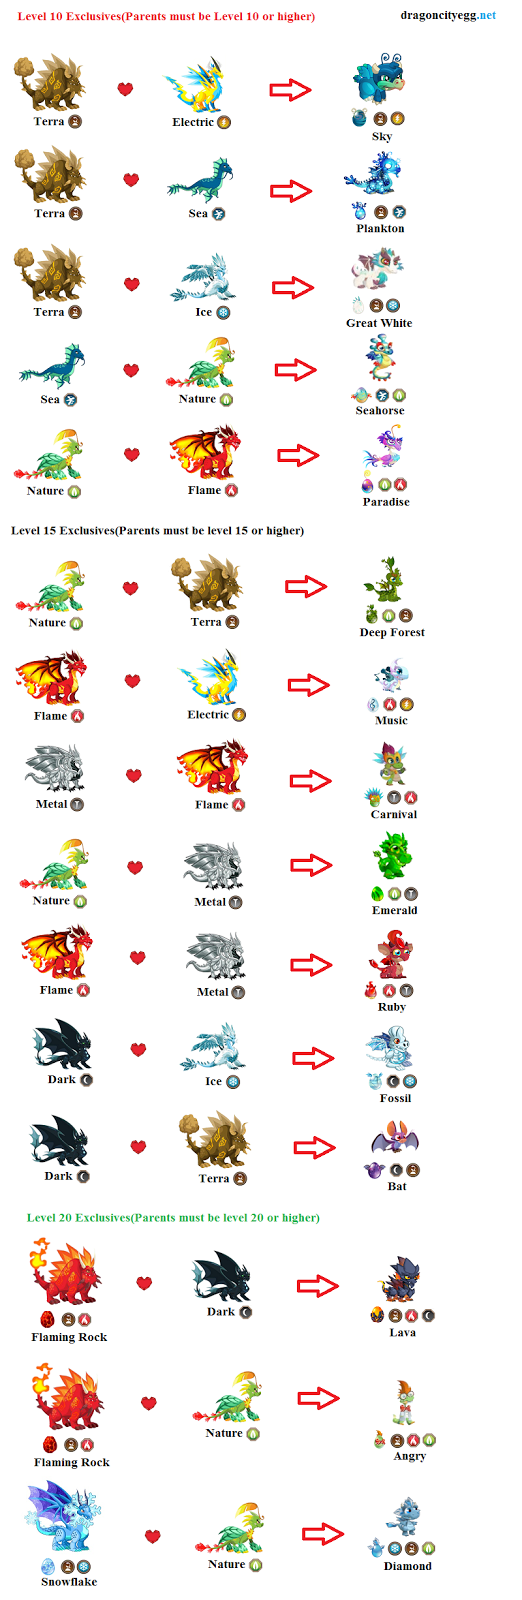 Dragon City Egg Guide: Dragon City Breeding Chart for Exclusives